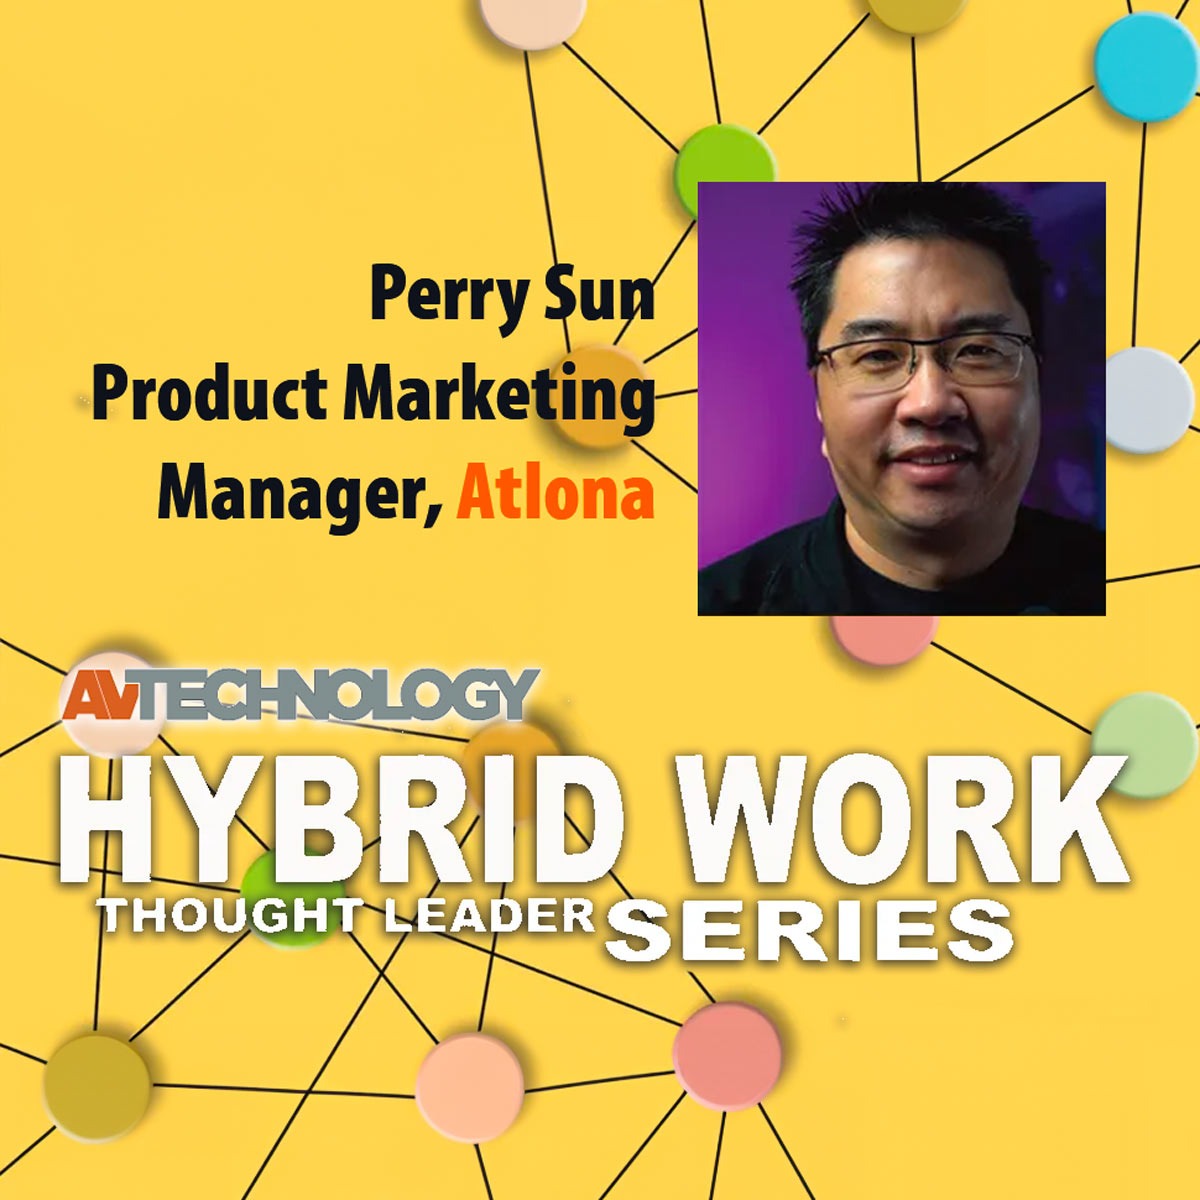 Perry Sun, our Product Marketing Manager, shares insight into trends that will play a role in hybrid workplace culture, space planning, and technologies in 2024.

Check out the feature on AVTechnology Magazine here: ow.ly/xsoy50RsRpX

#AVTweeps #ProAV #AVoIP #NetworkedAV